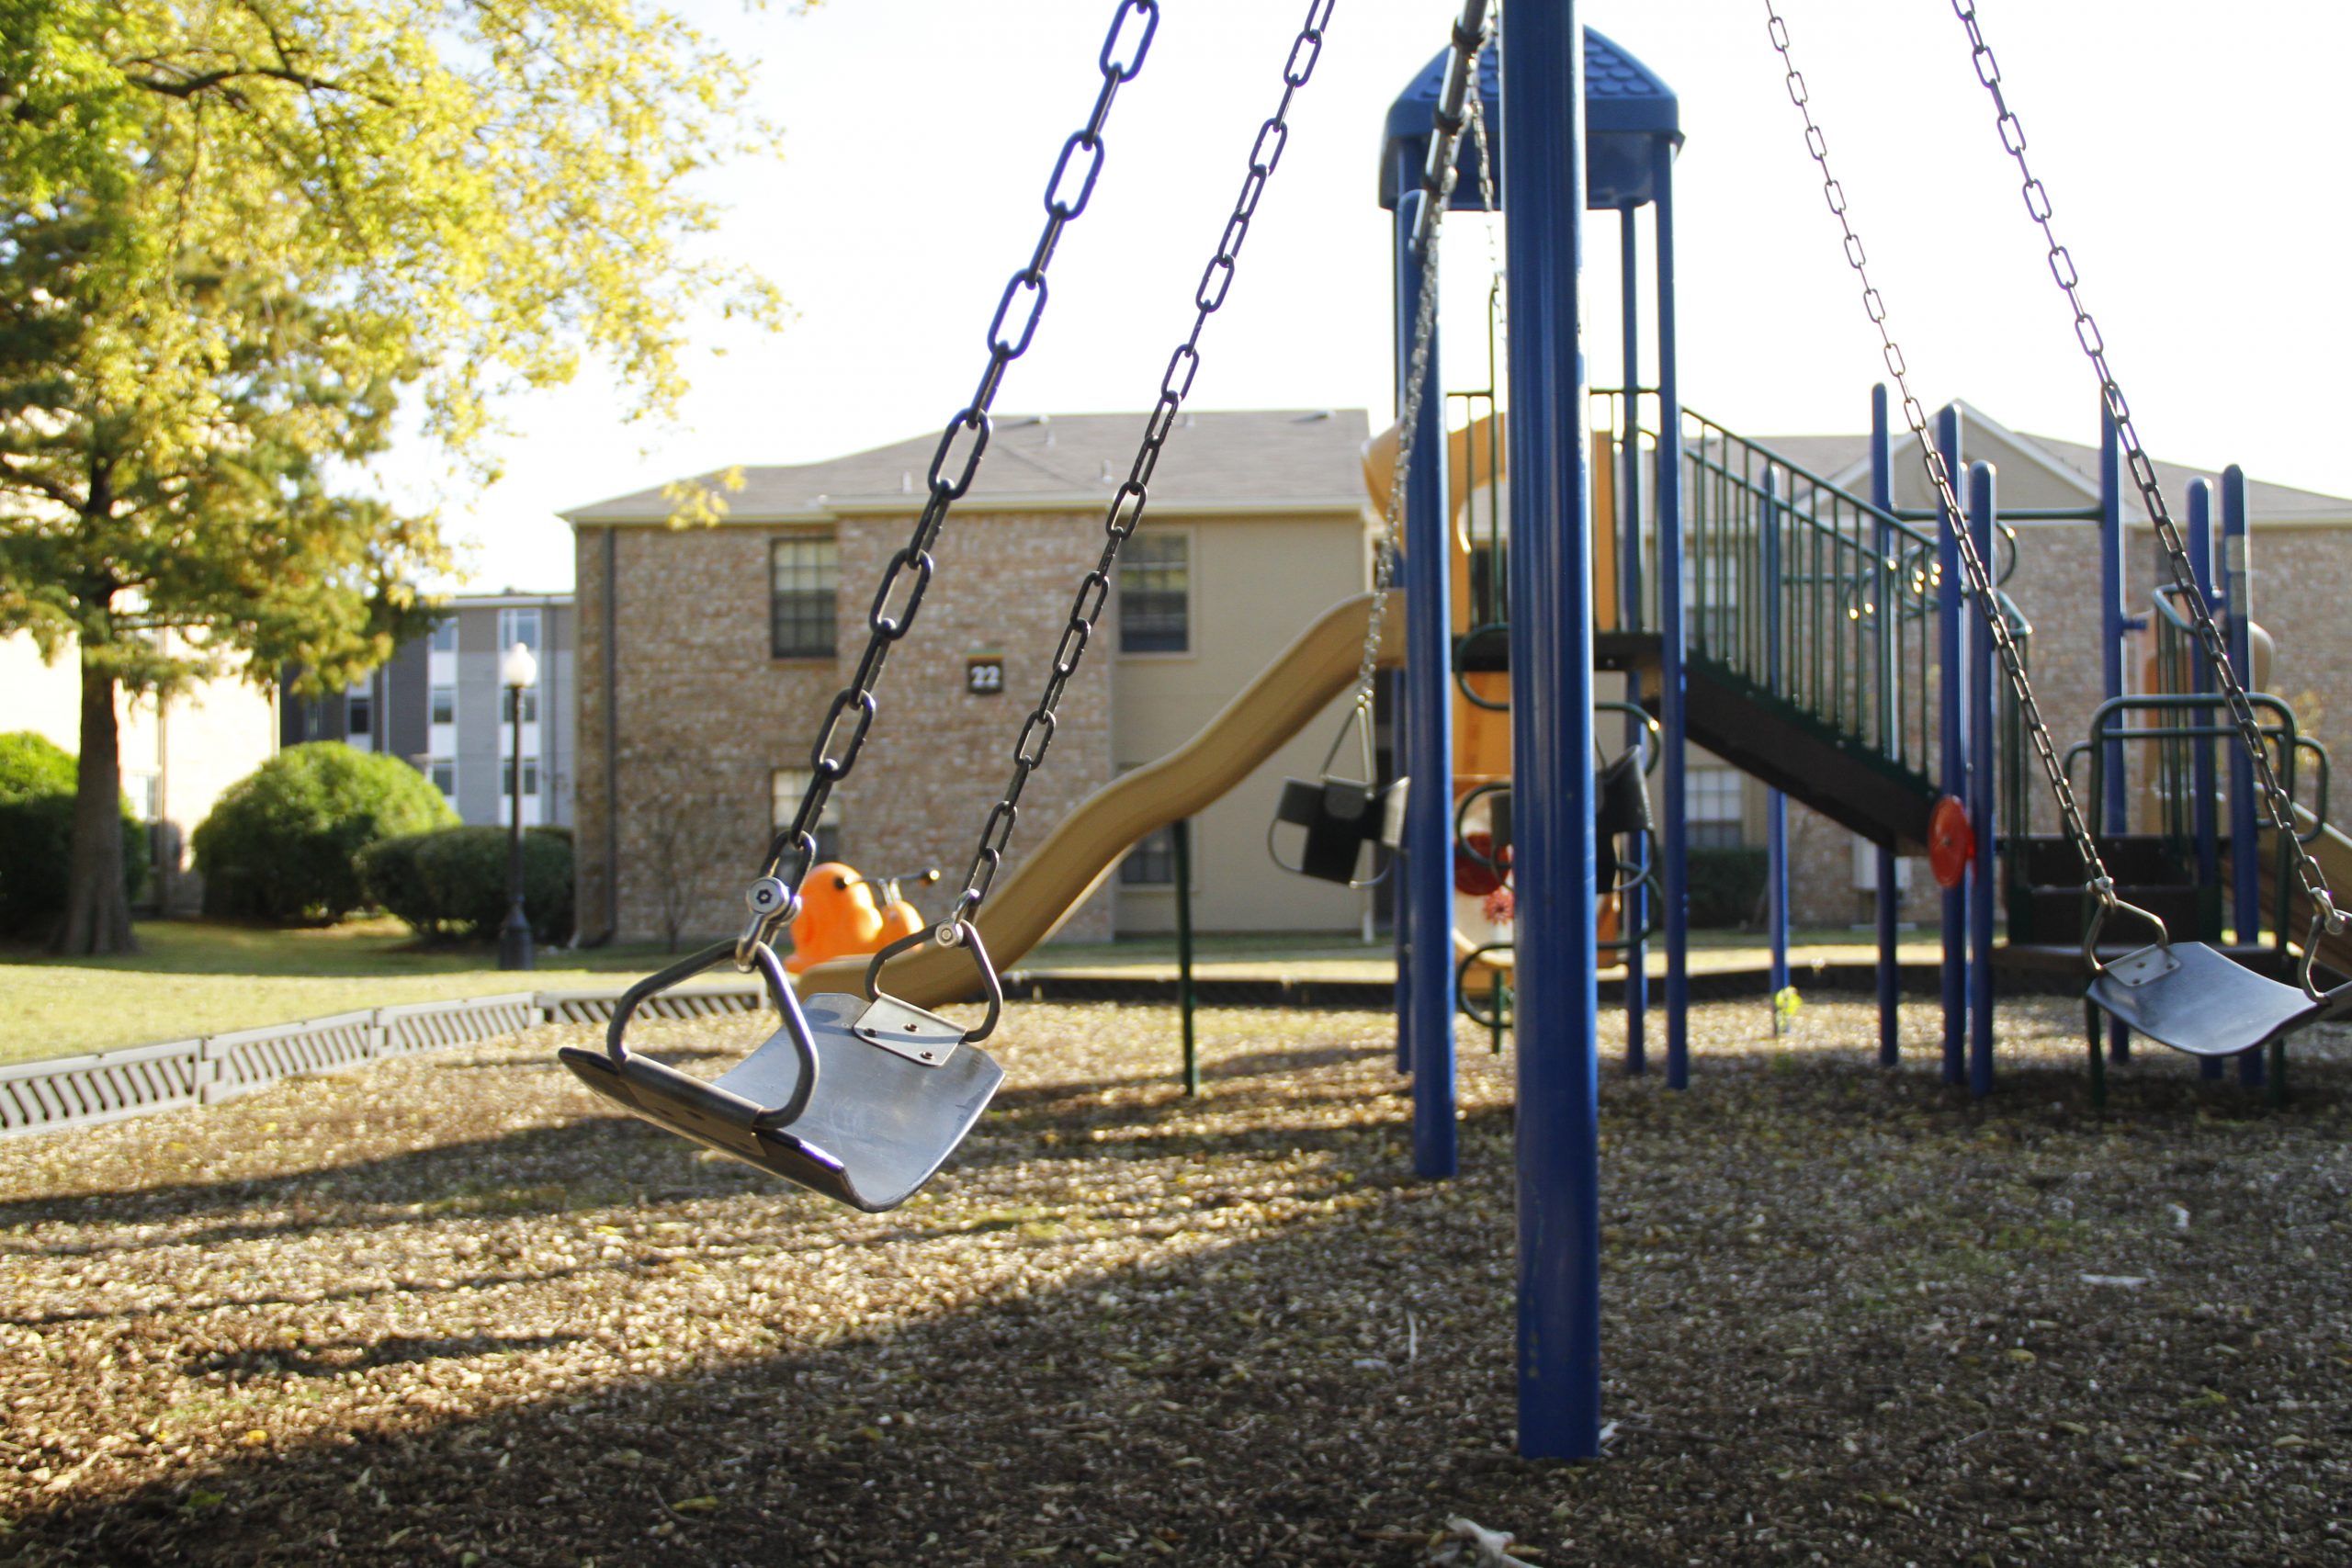 Online Student Petition for Campus Swings Receives over 600 signatures